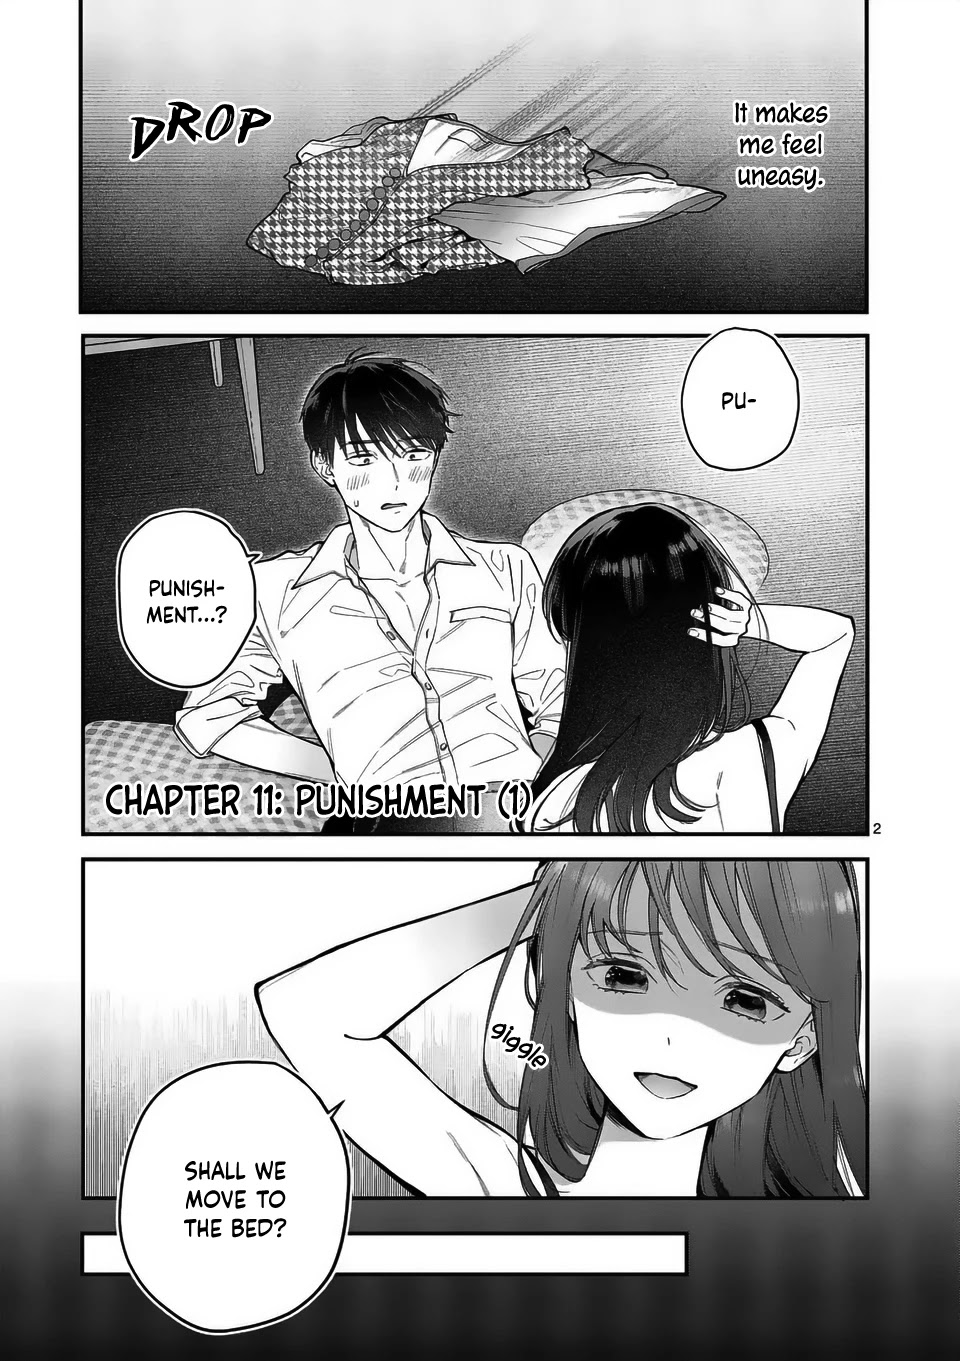 Is It Wrong To Get Done By A Girl? Chapter 11: Punishment (1) - Picture 3